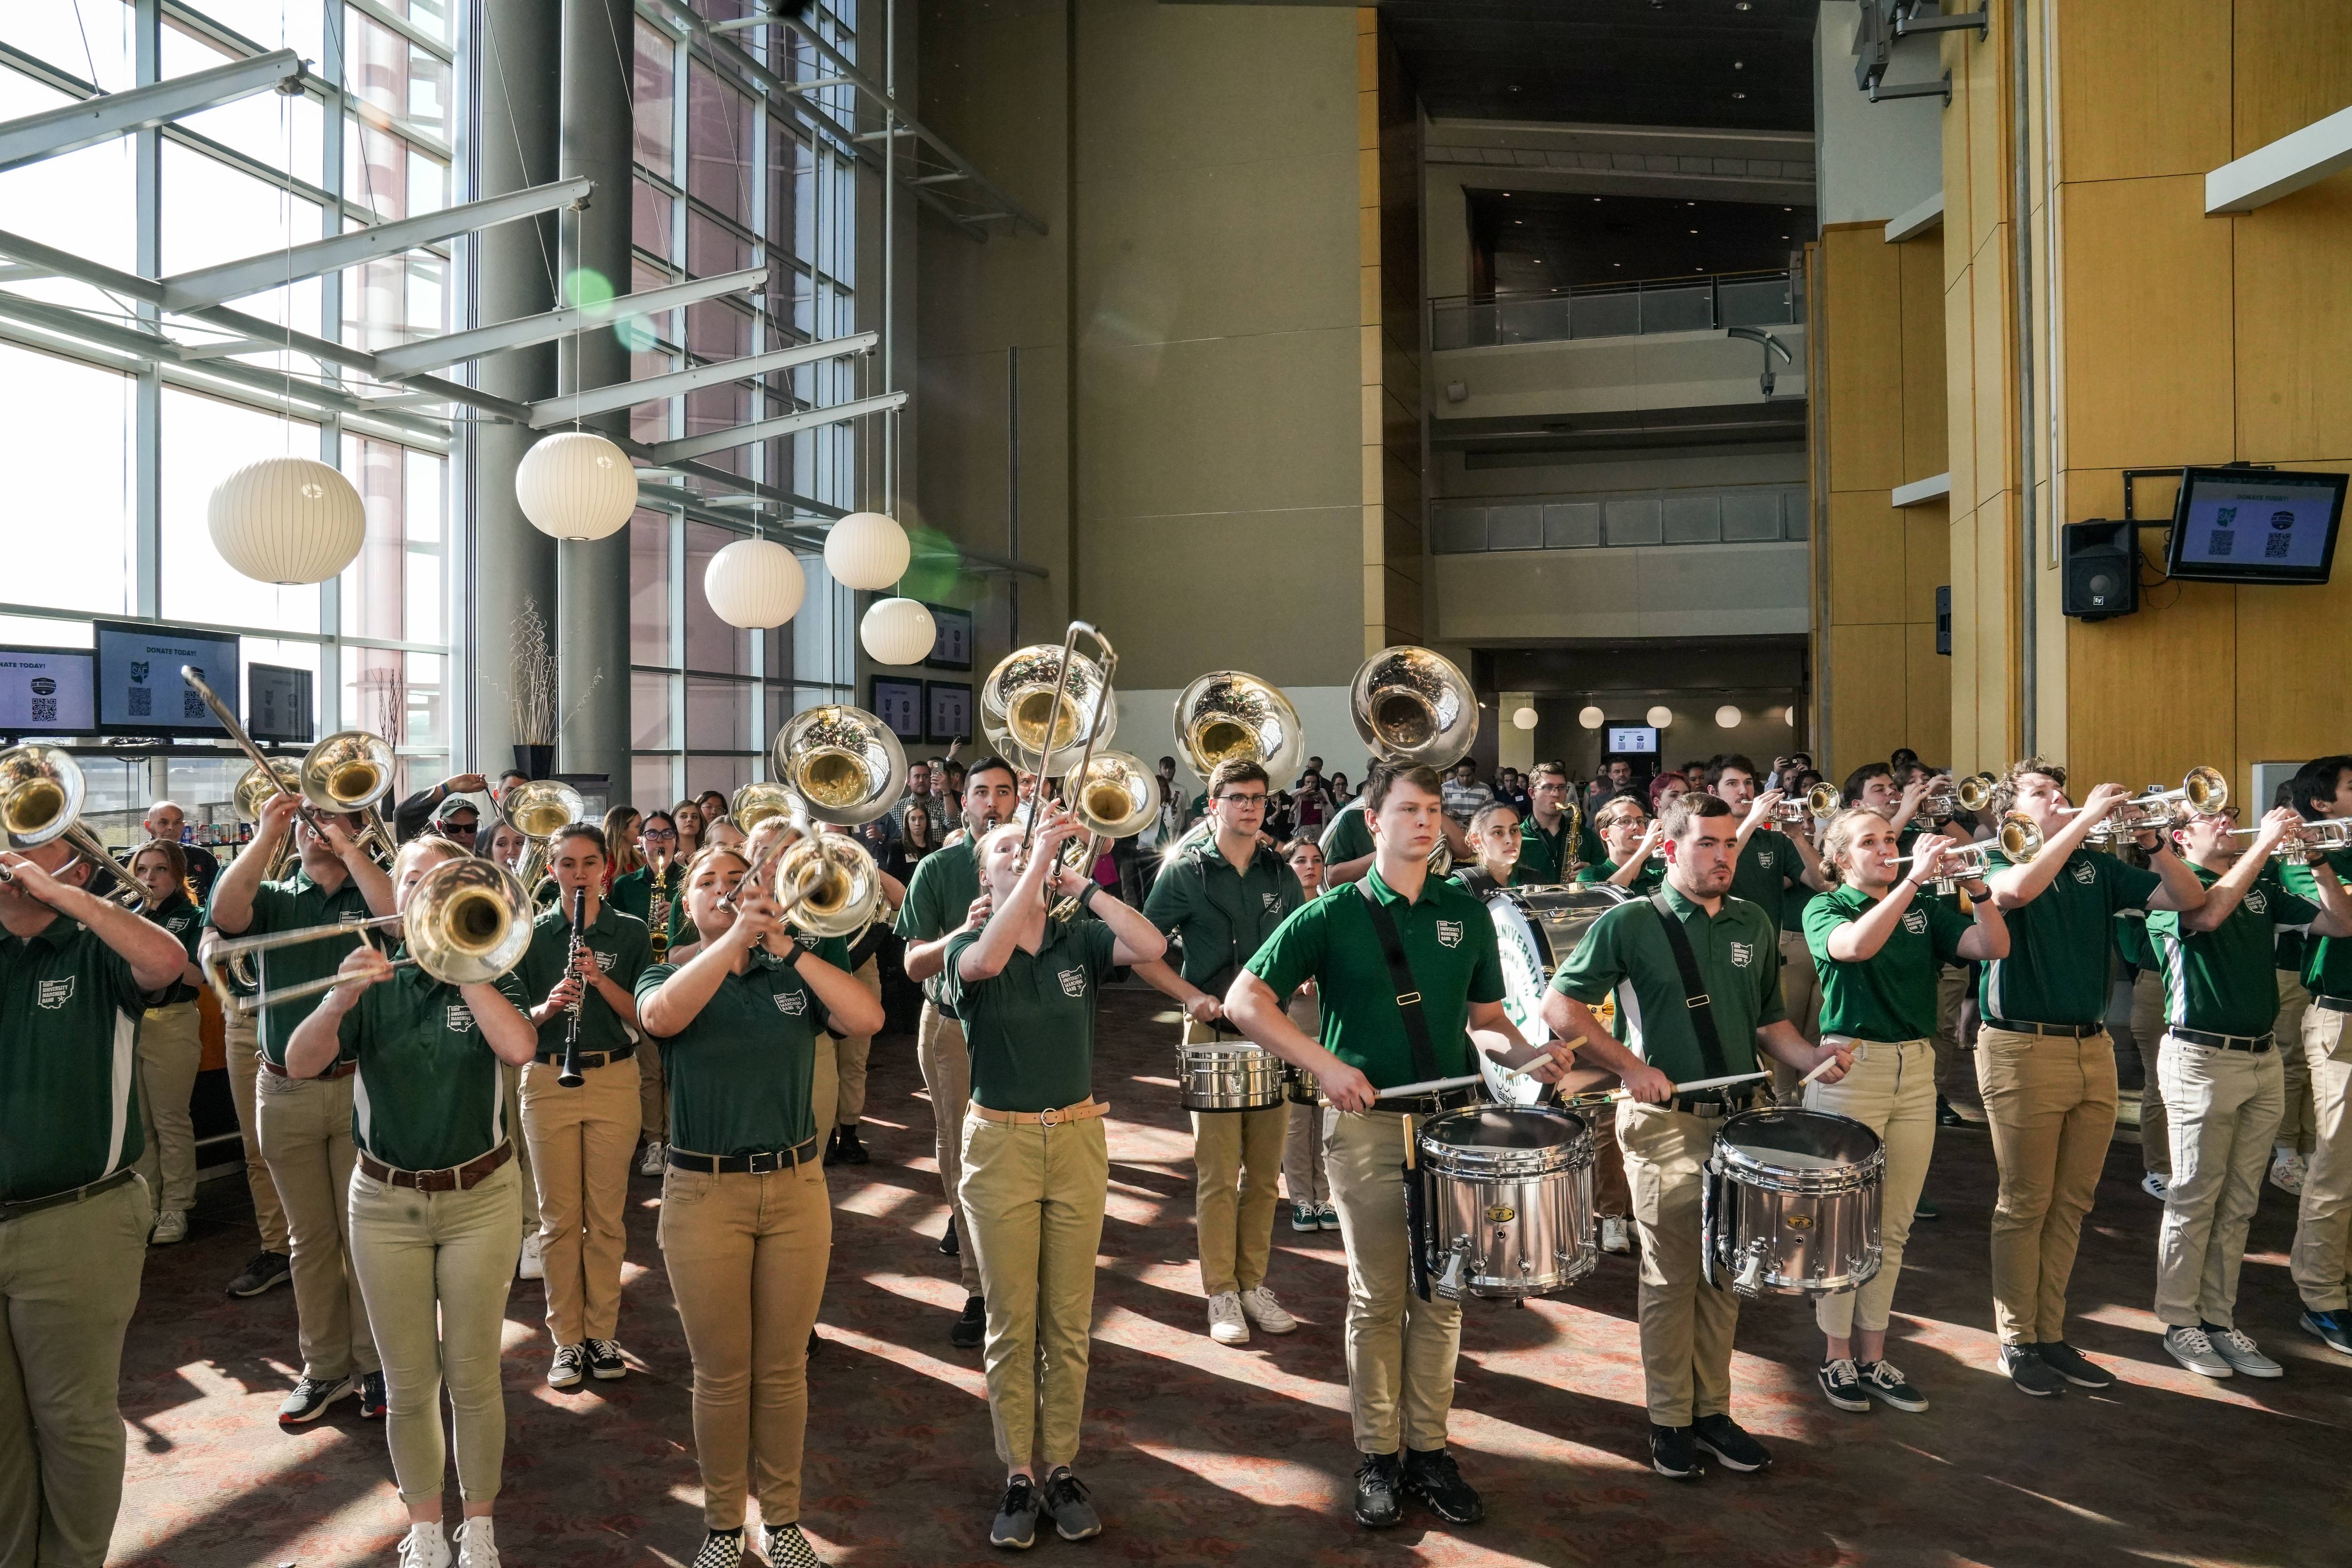 The Marching 110 performs at the Bobcat Networking Event